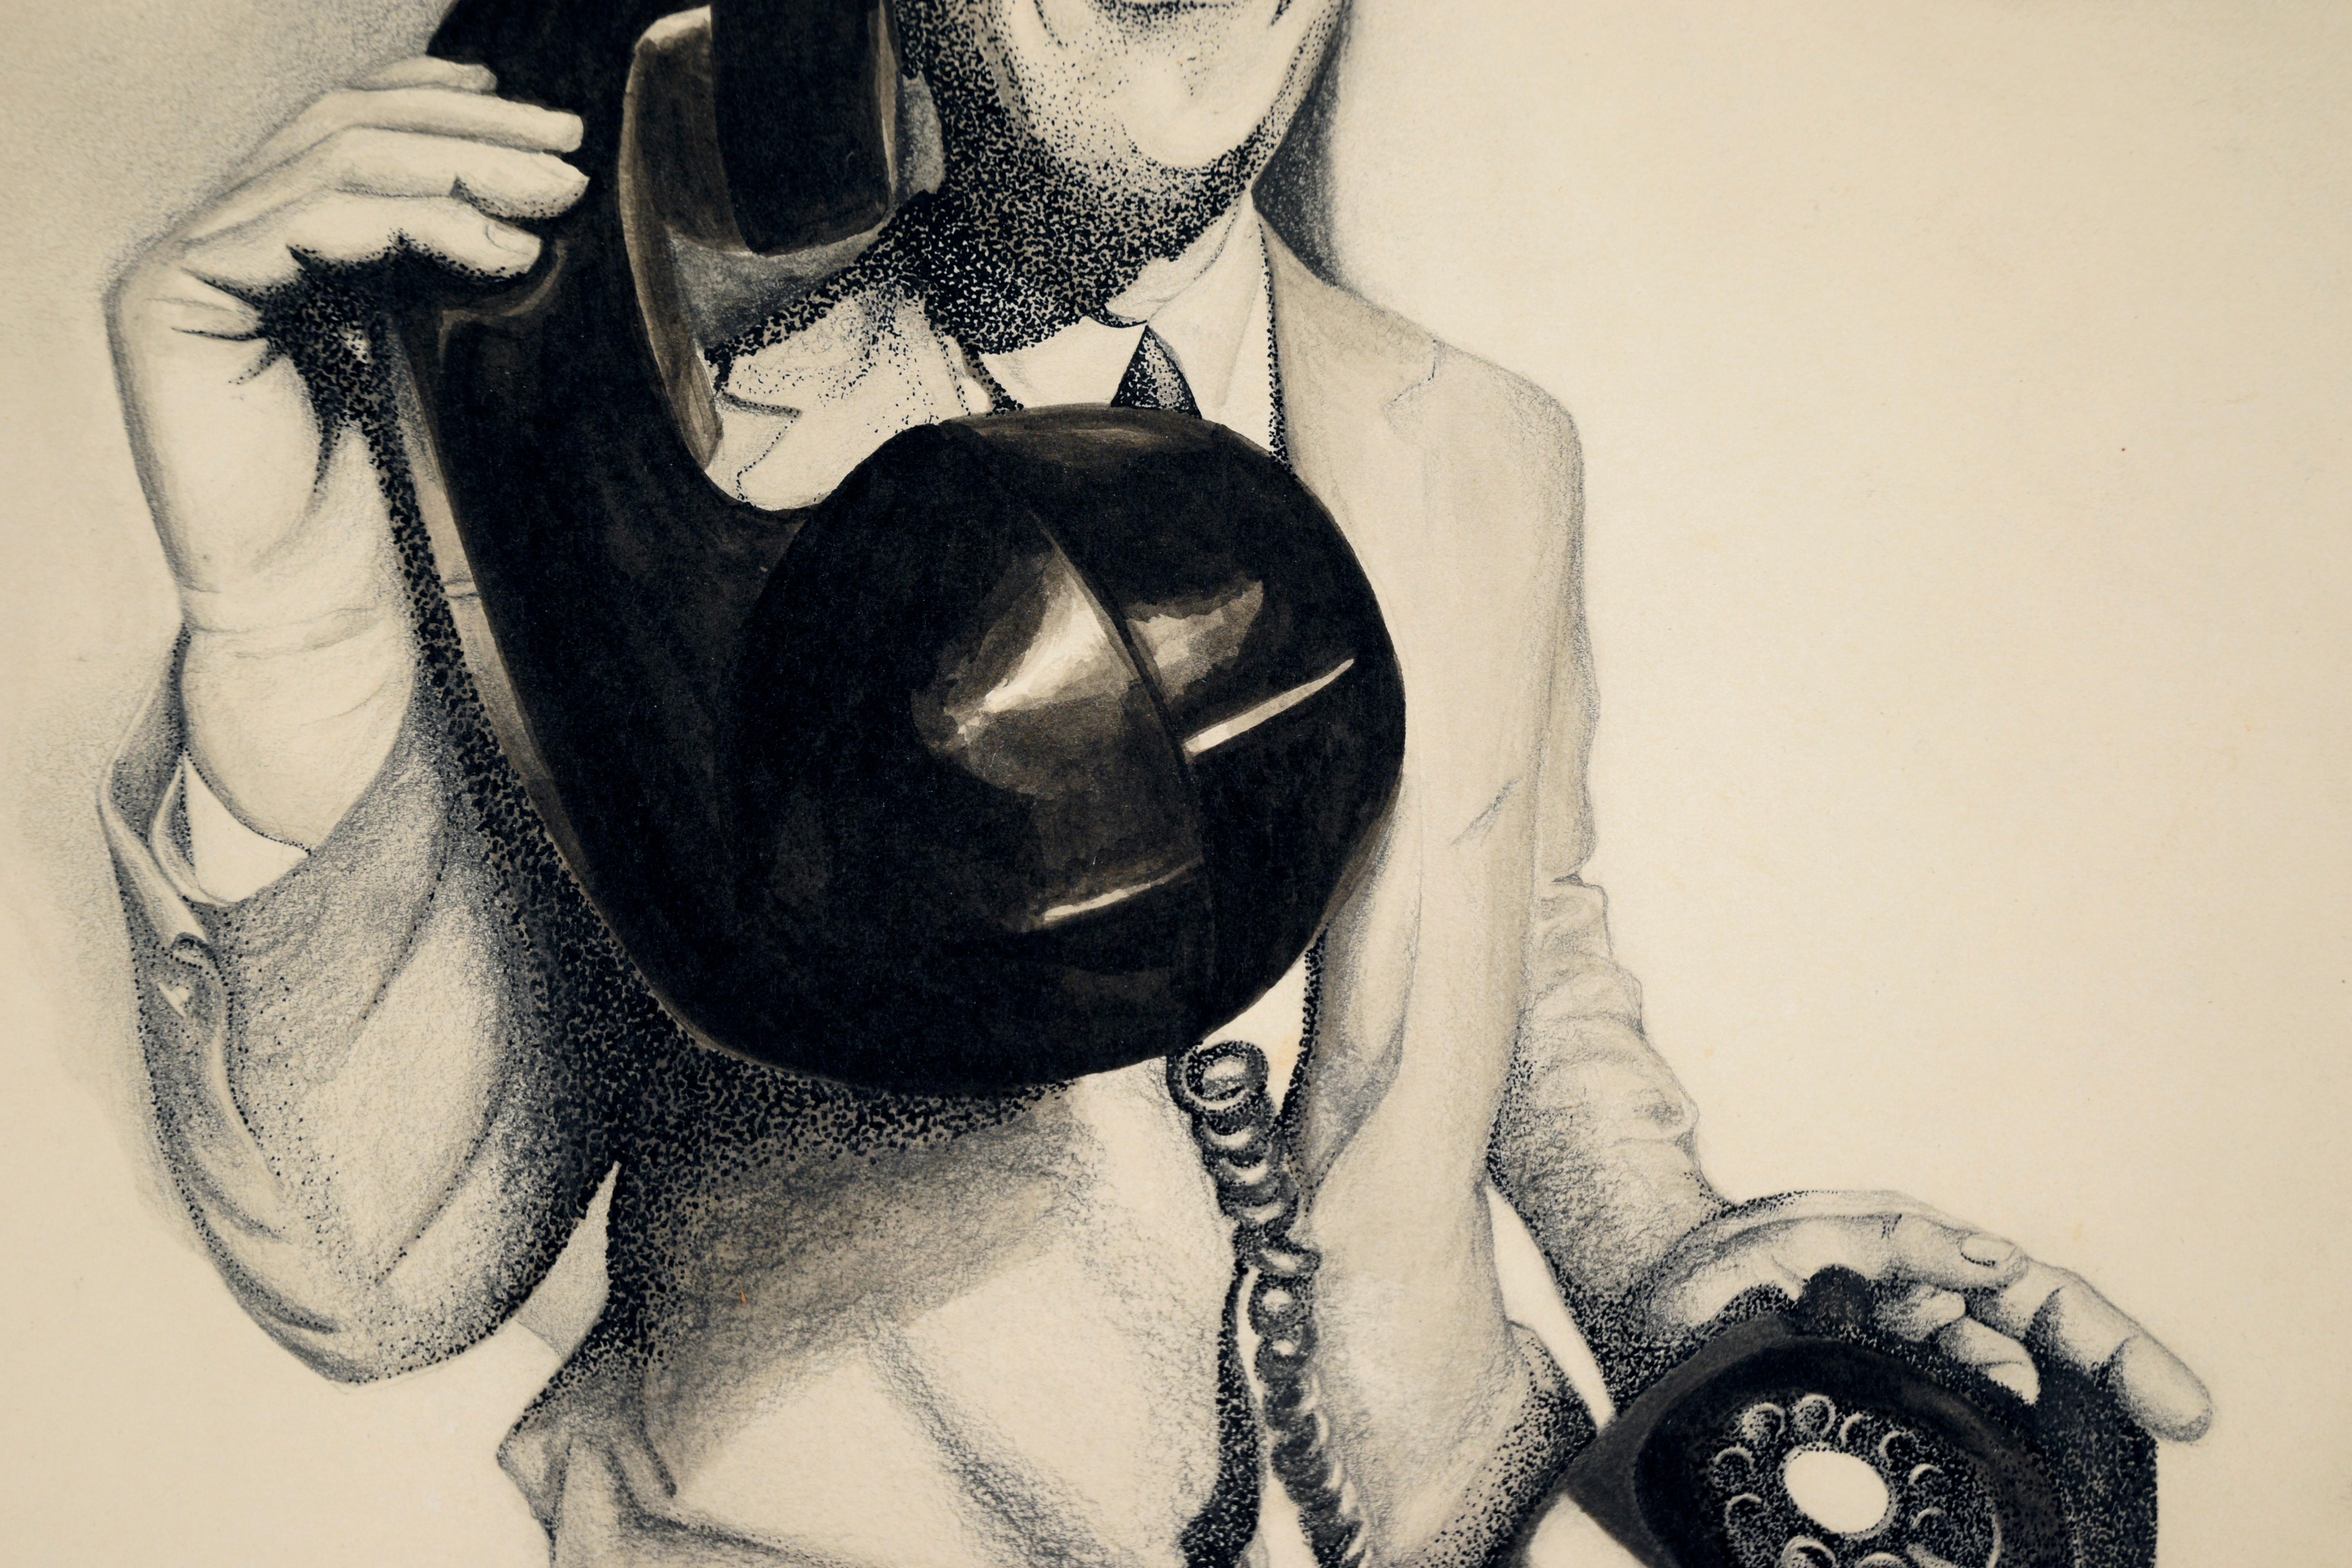 Man with Telephone - Surrealist Black and White Portrait in Ink on Paper For Sale 1